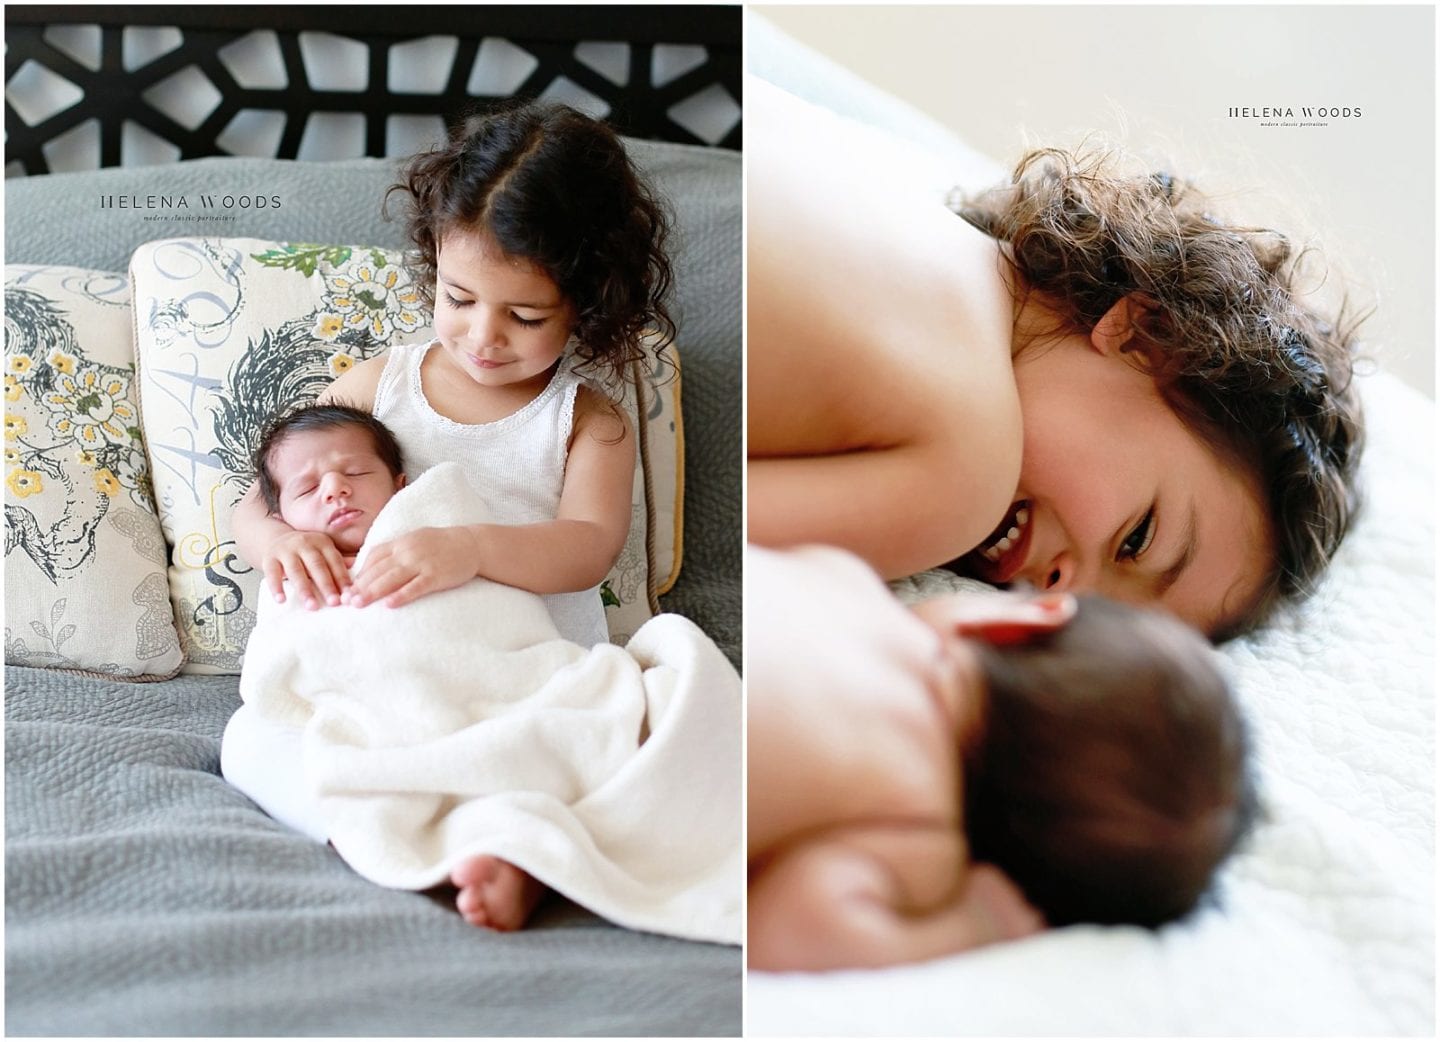 child and newborn siblings with connecticut lifestyle newborn phototgrapher helena woods